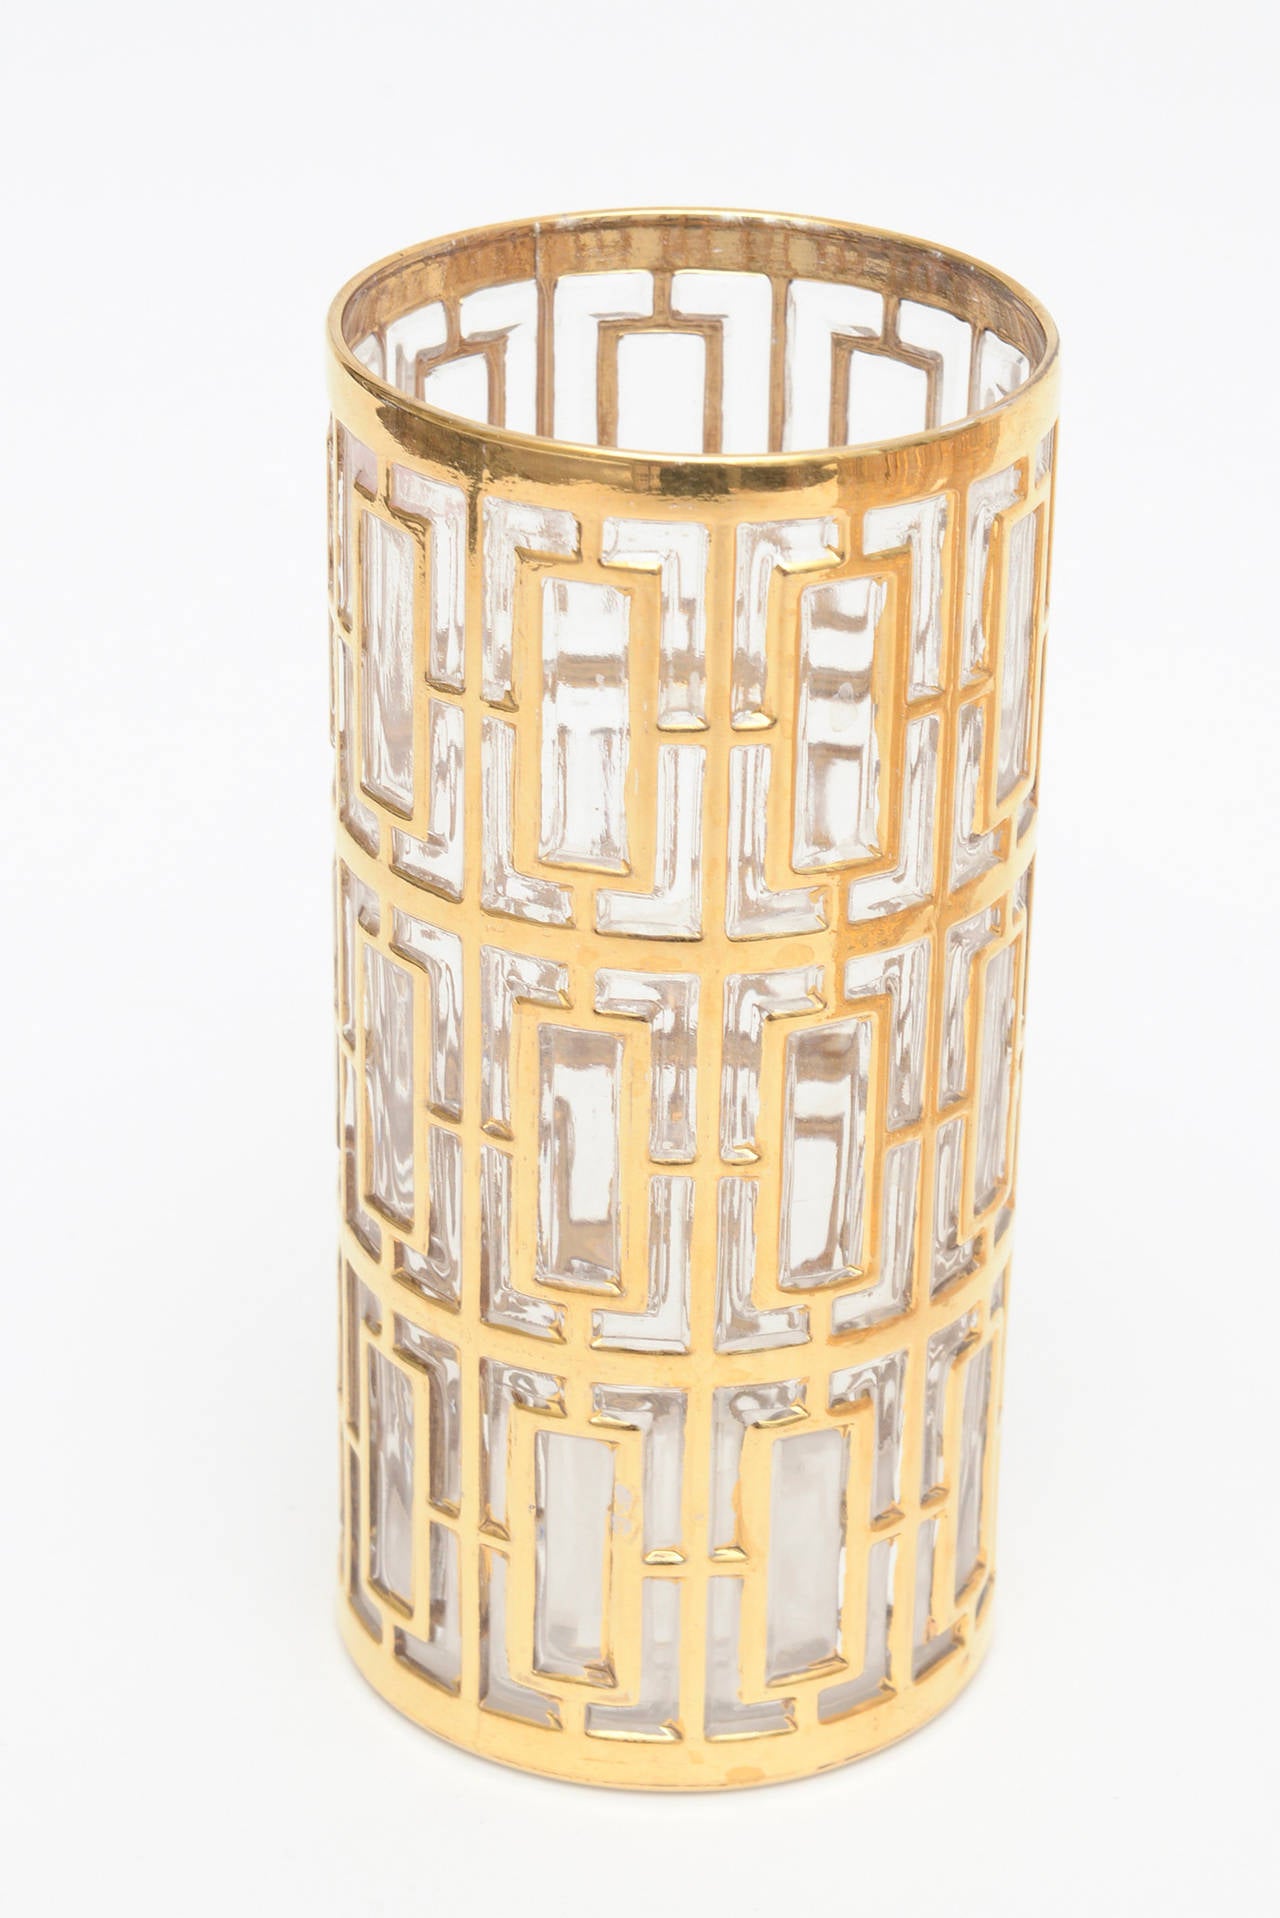 Mid-20th Century Set of 22 Pieces of Shoji Screen Gold Plated Overlay over Clear Glass Barware